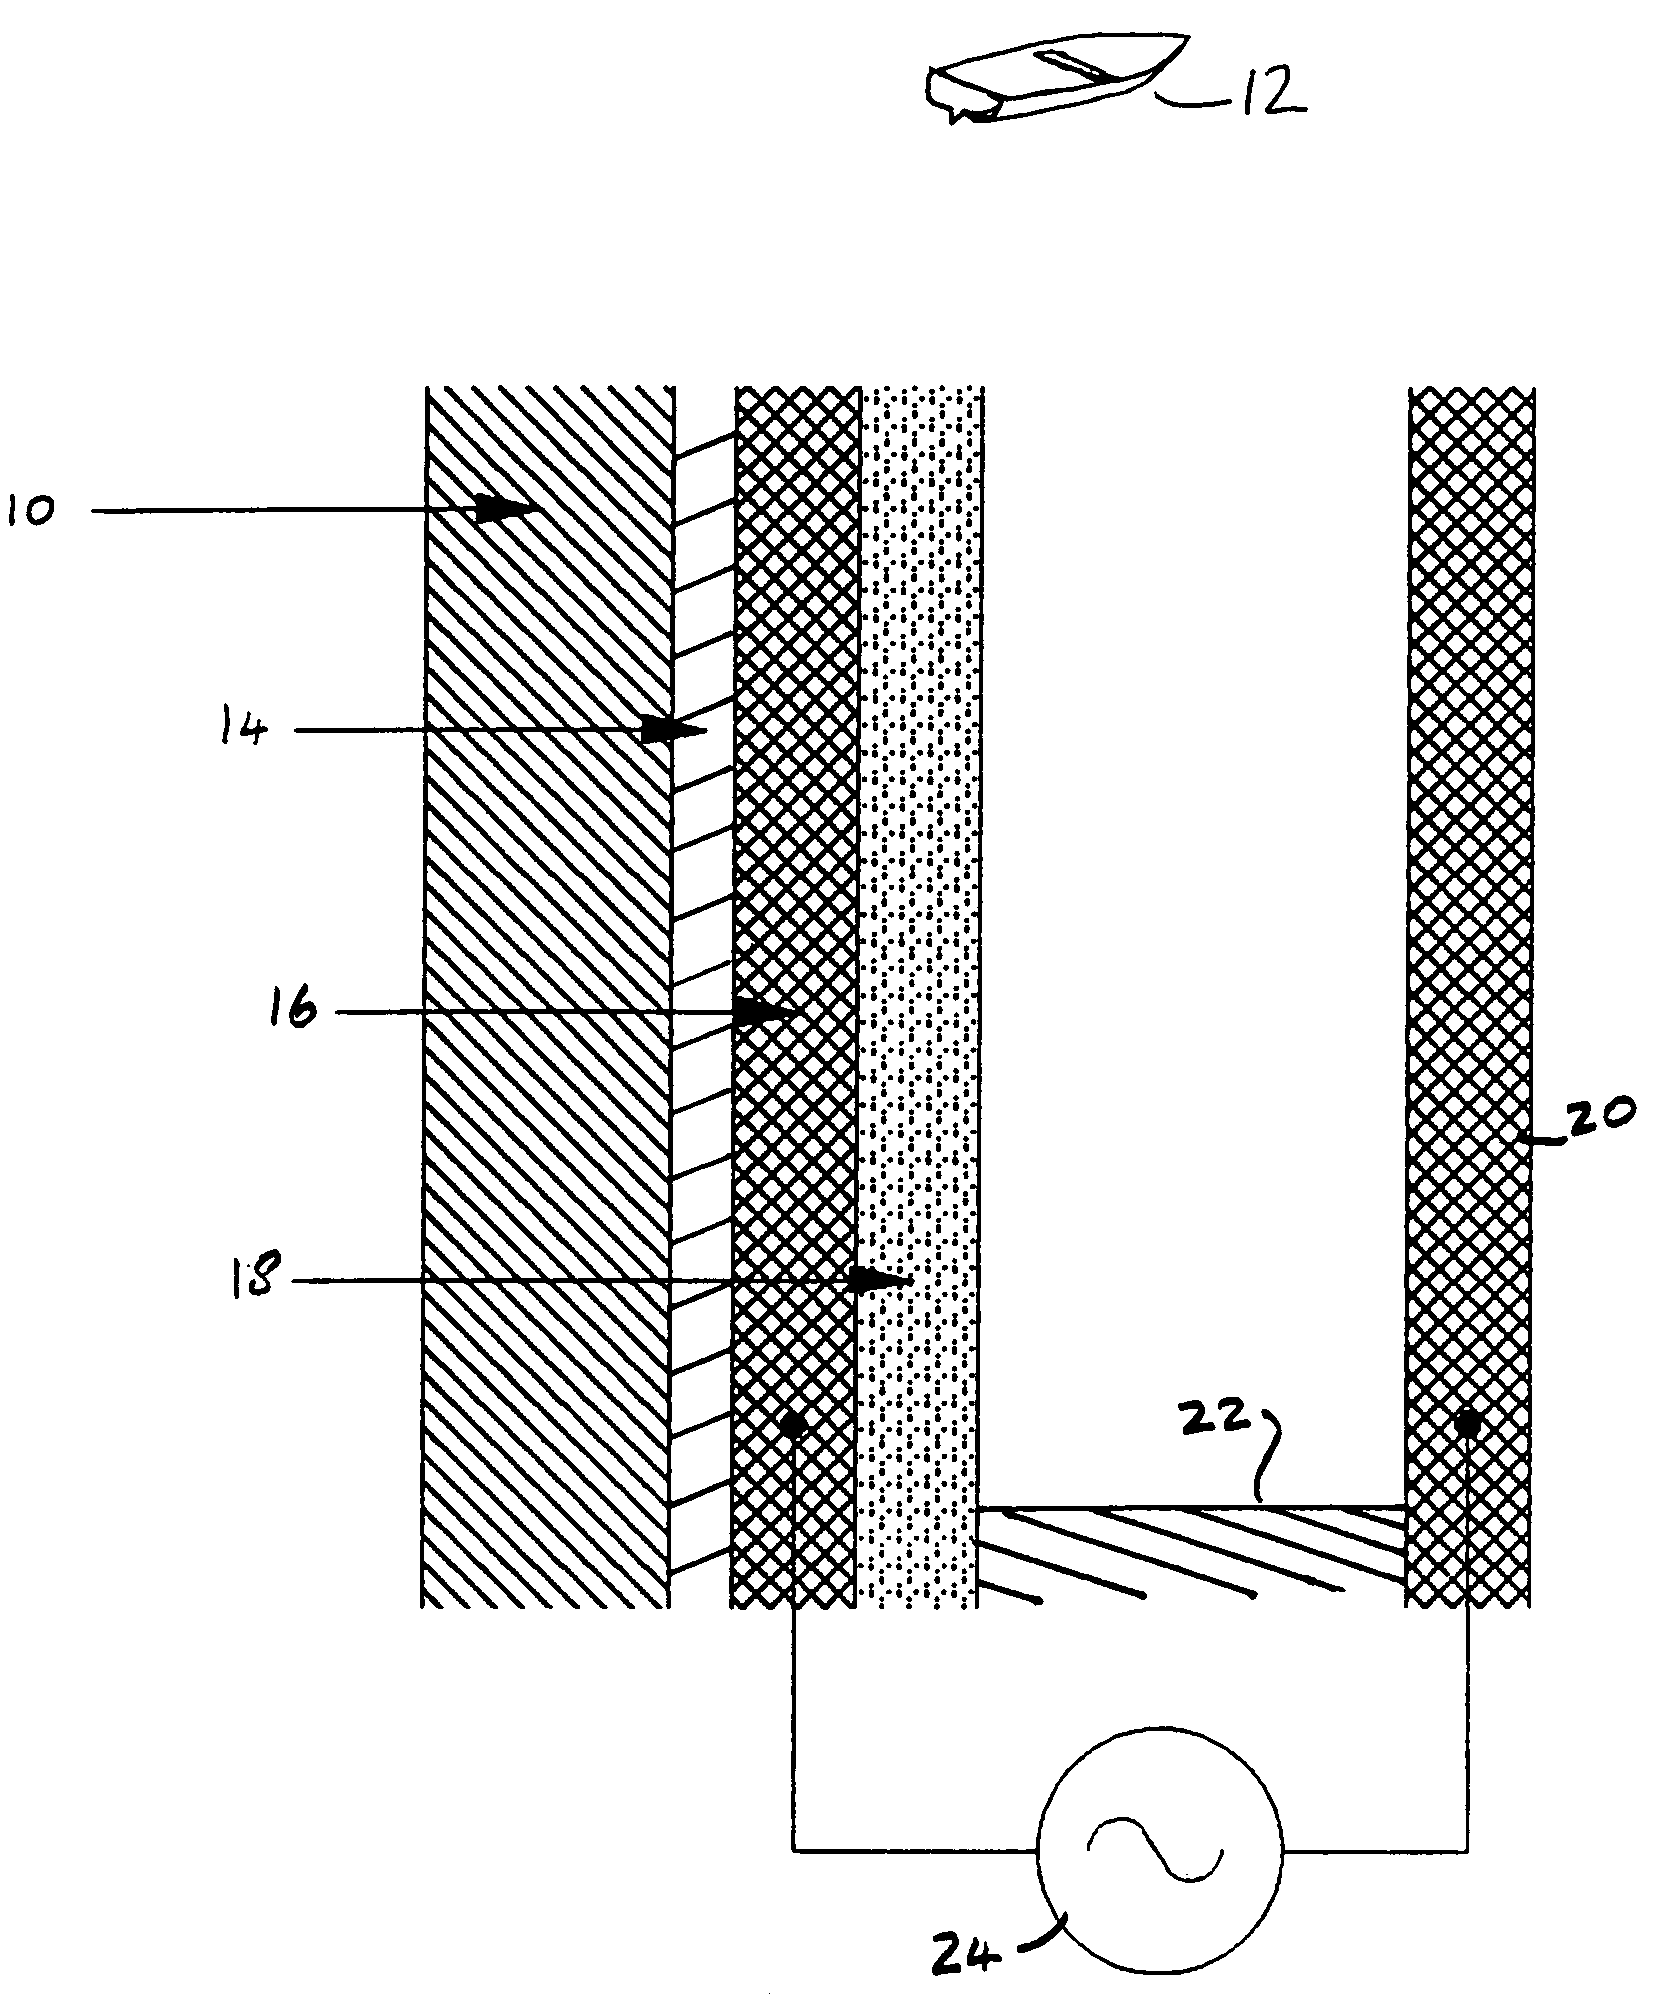 Apparatus for harming or killing fouling flora or fauna and an item carrying the same